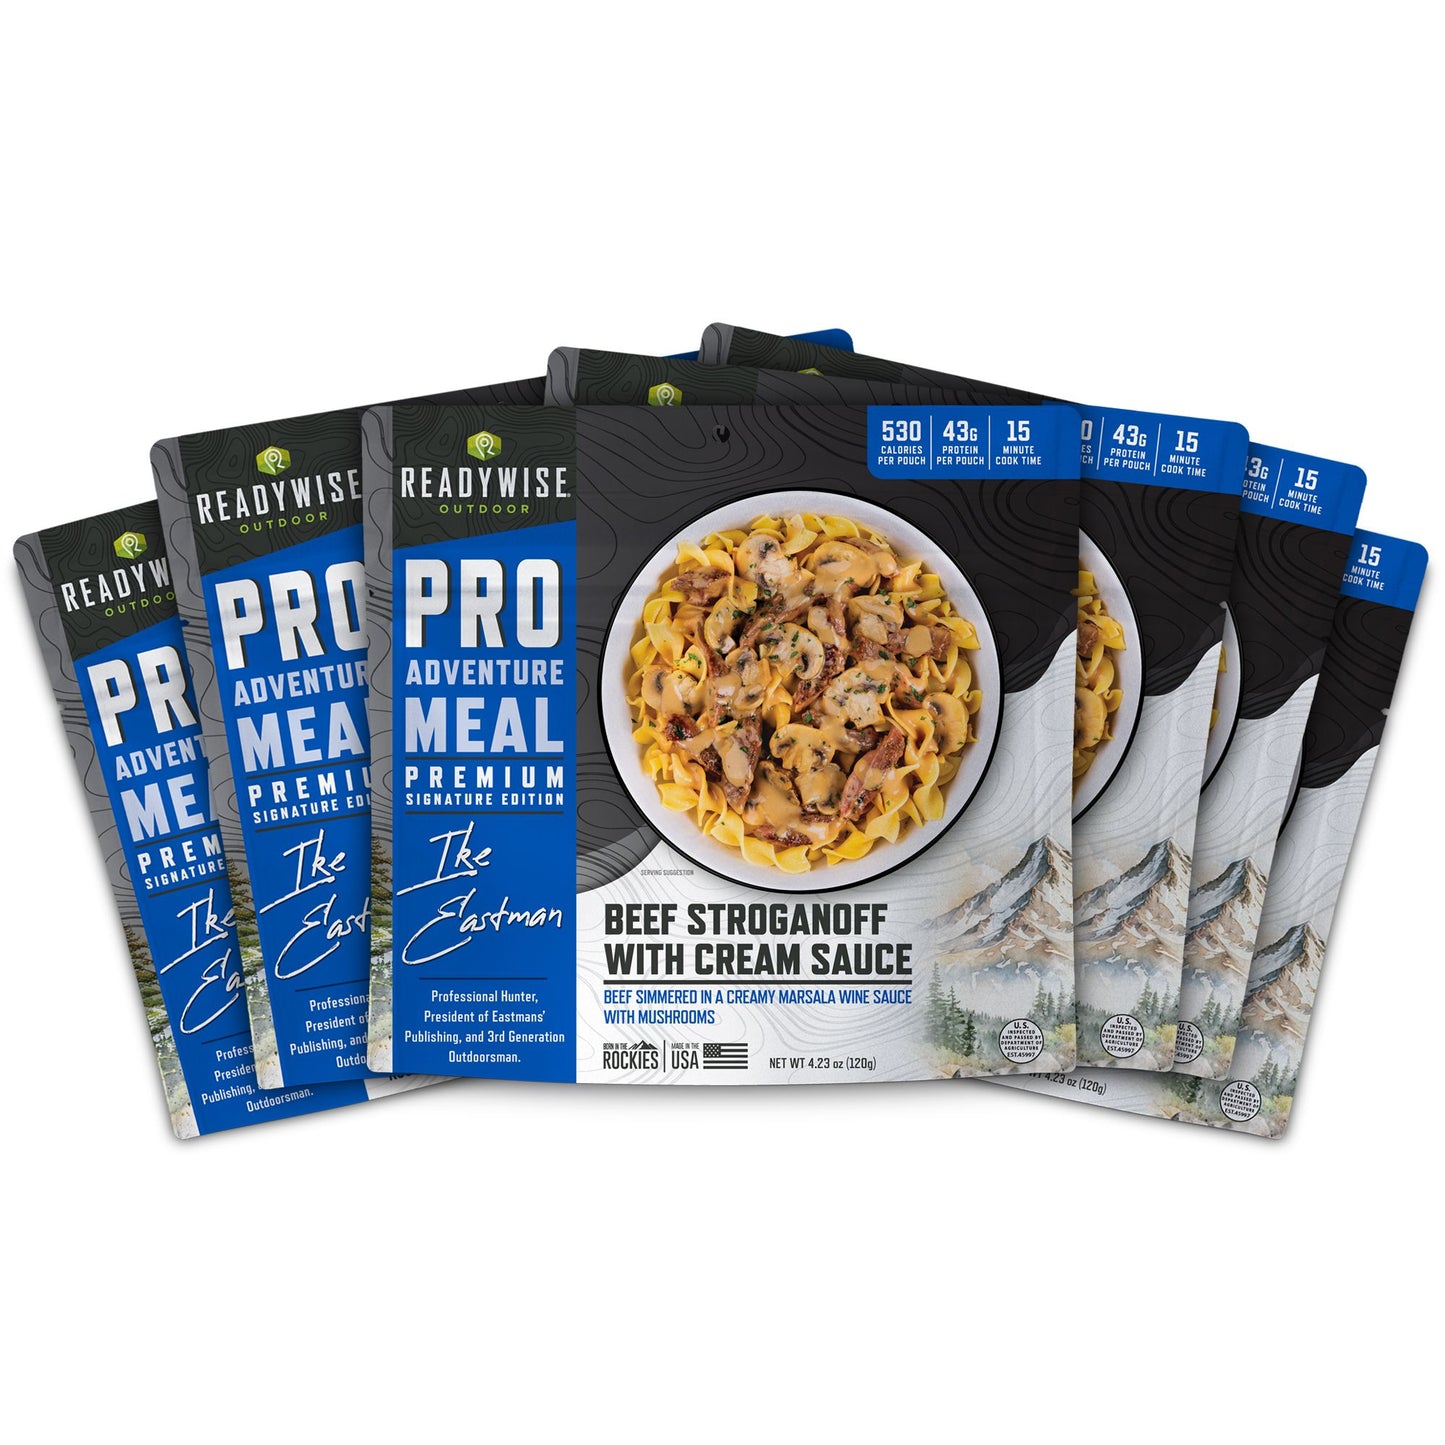 ReadyWise Pro 6 Pack Adventure Meal Beef Stroganoff with Cream Sauce